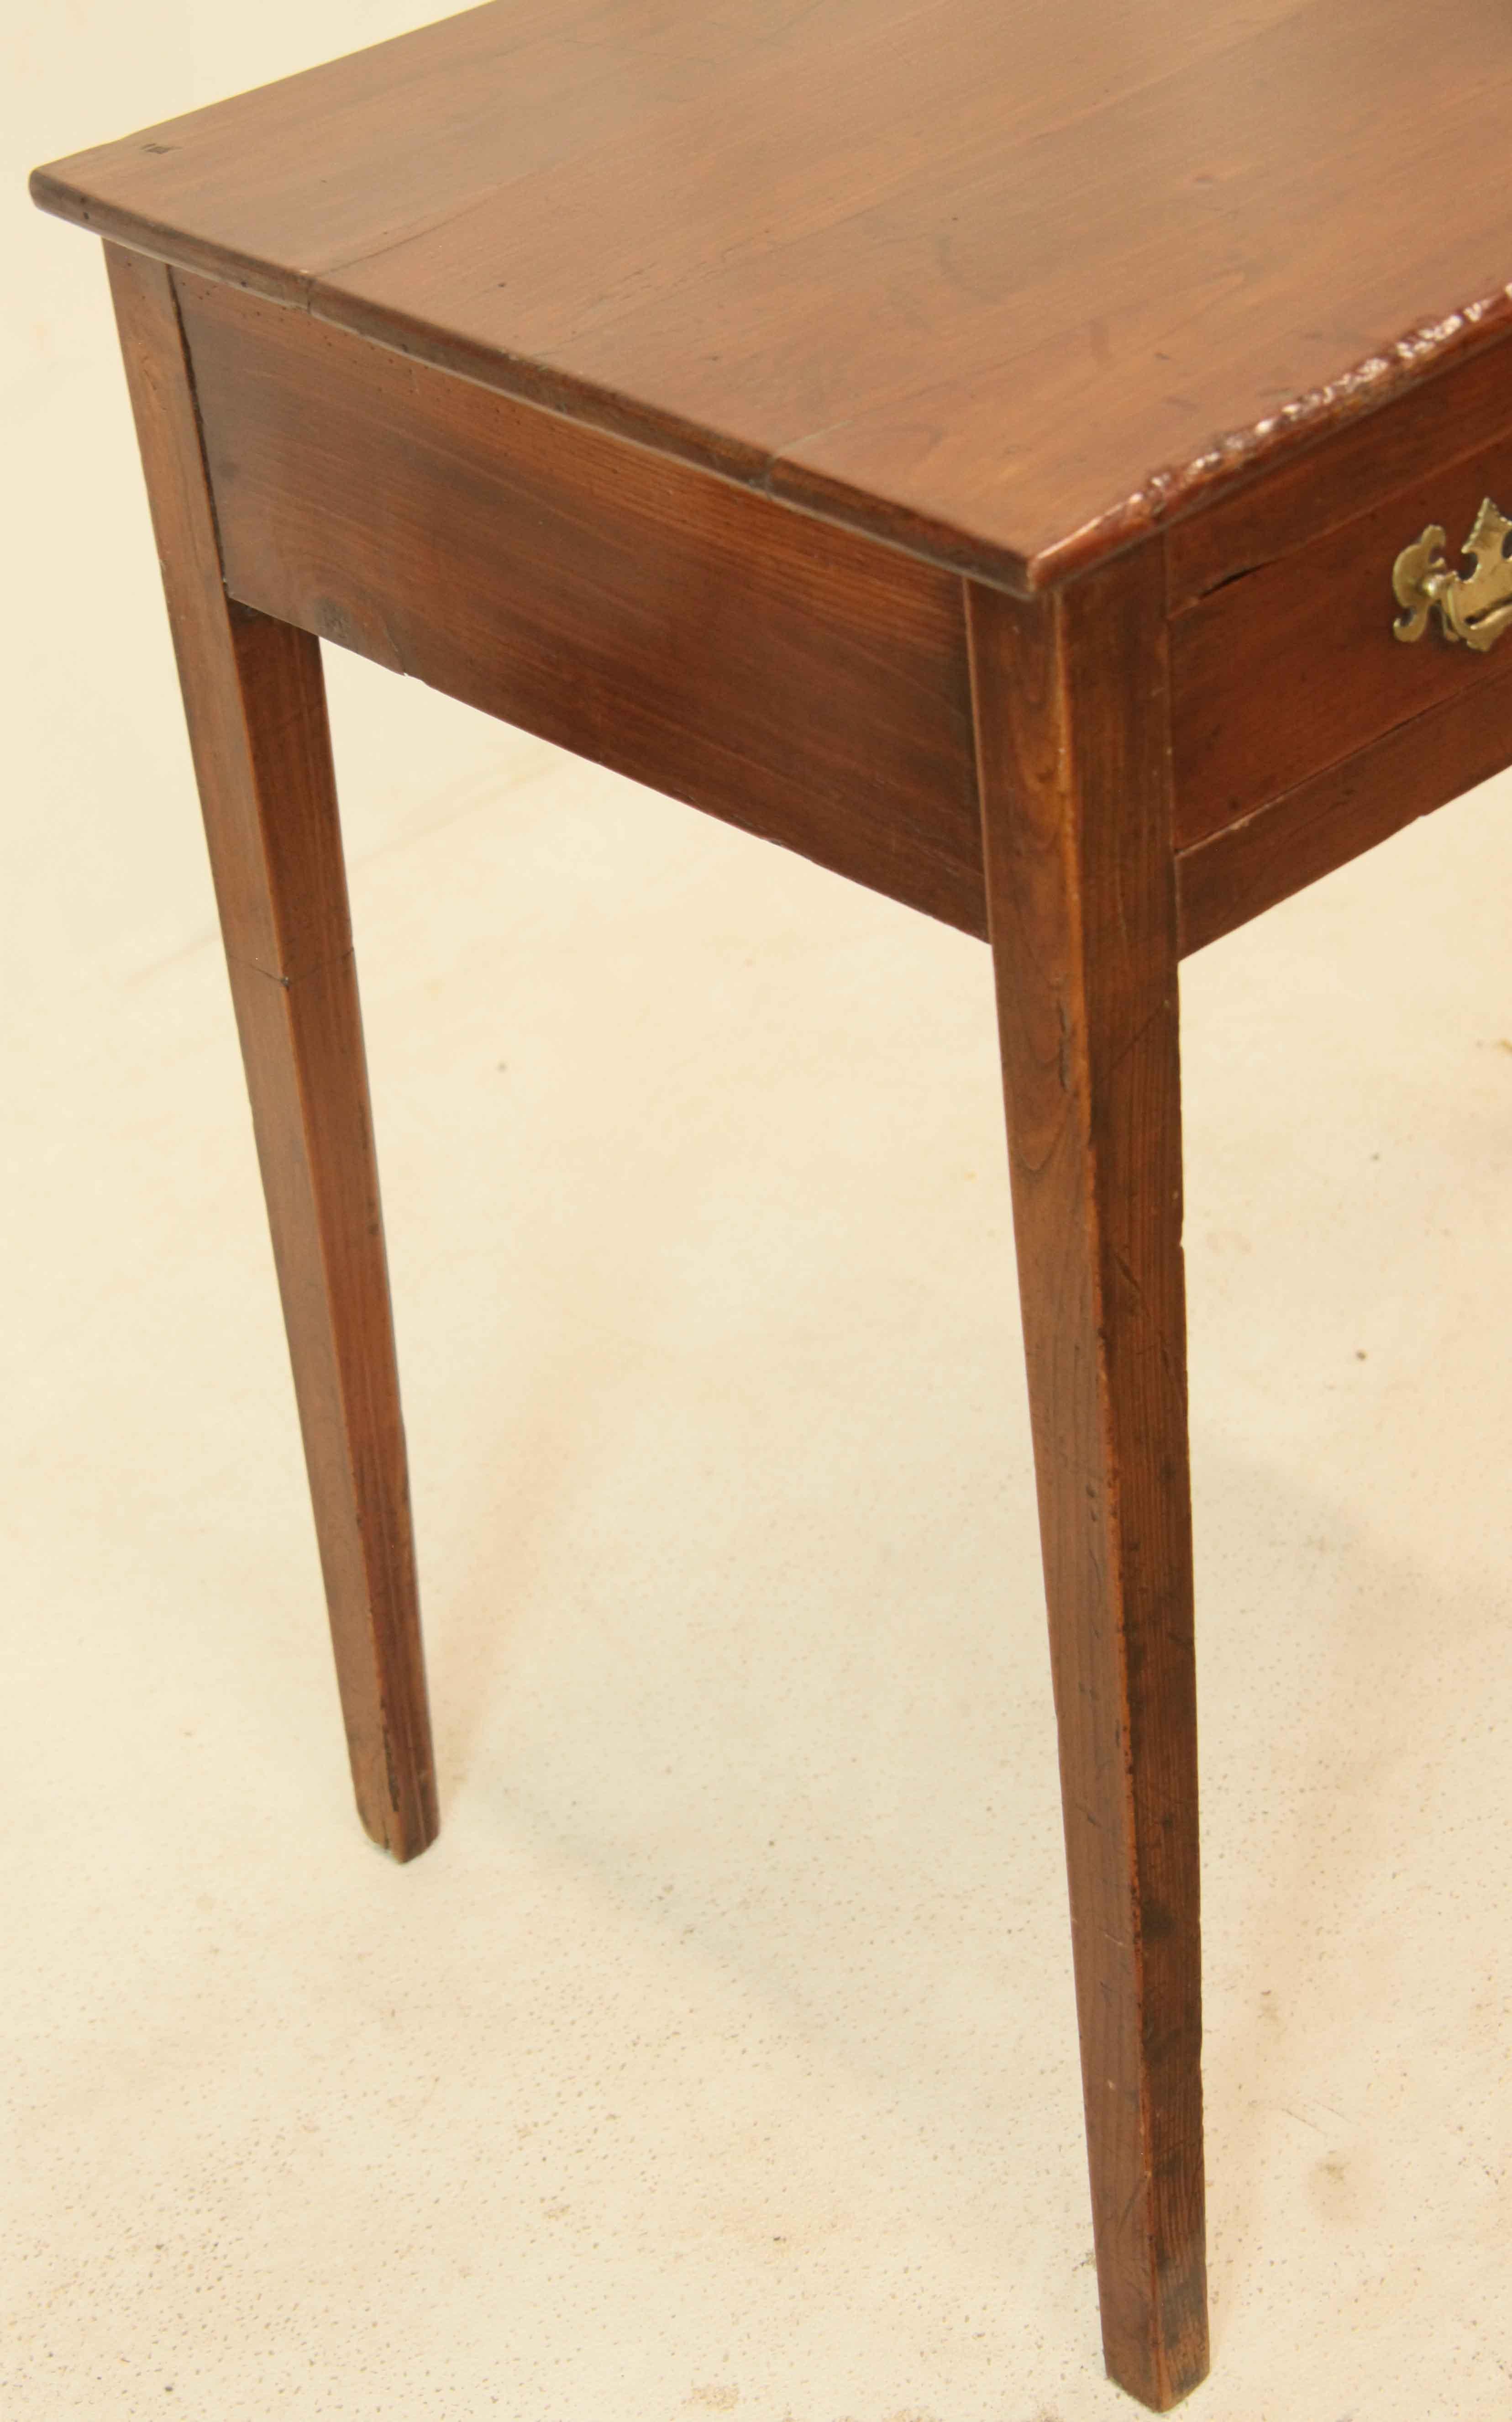 English cherry one drawer side table, the top has beautiful cherry grain and color,  single long drawer with ''bat wing'' brass pulls and oval escutcheon.  The legs have good proportion, are nicely tapered, and have a very slight chamfer on the